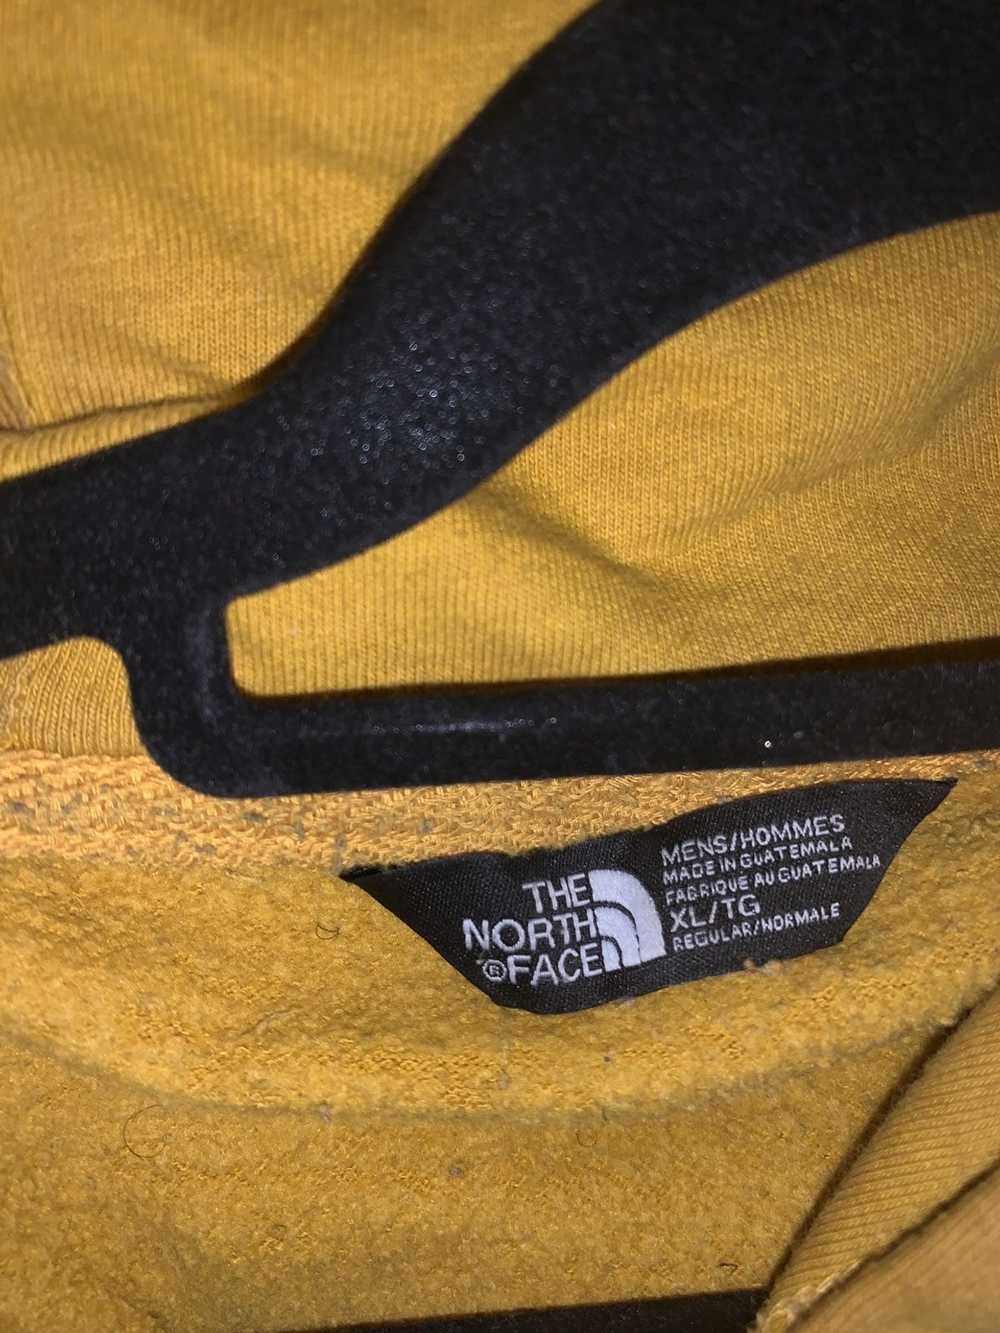 The North Face The North Face Hoodie Bundle - image 3